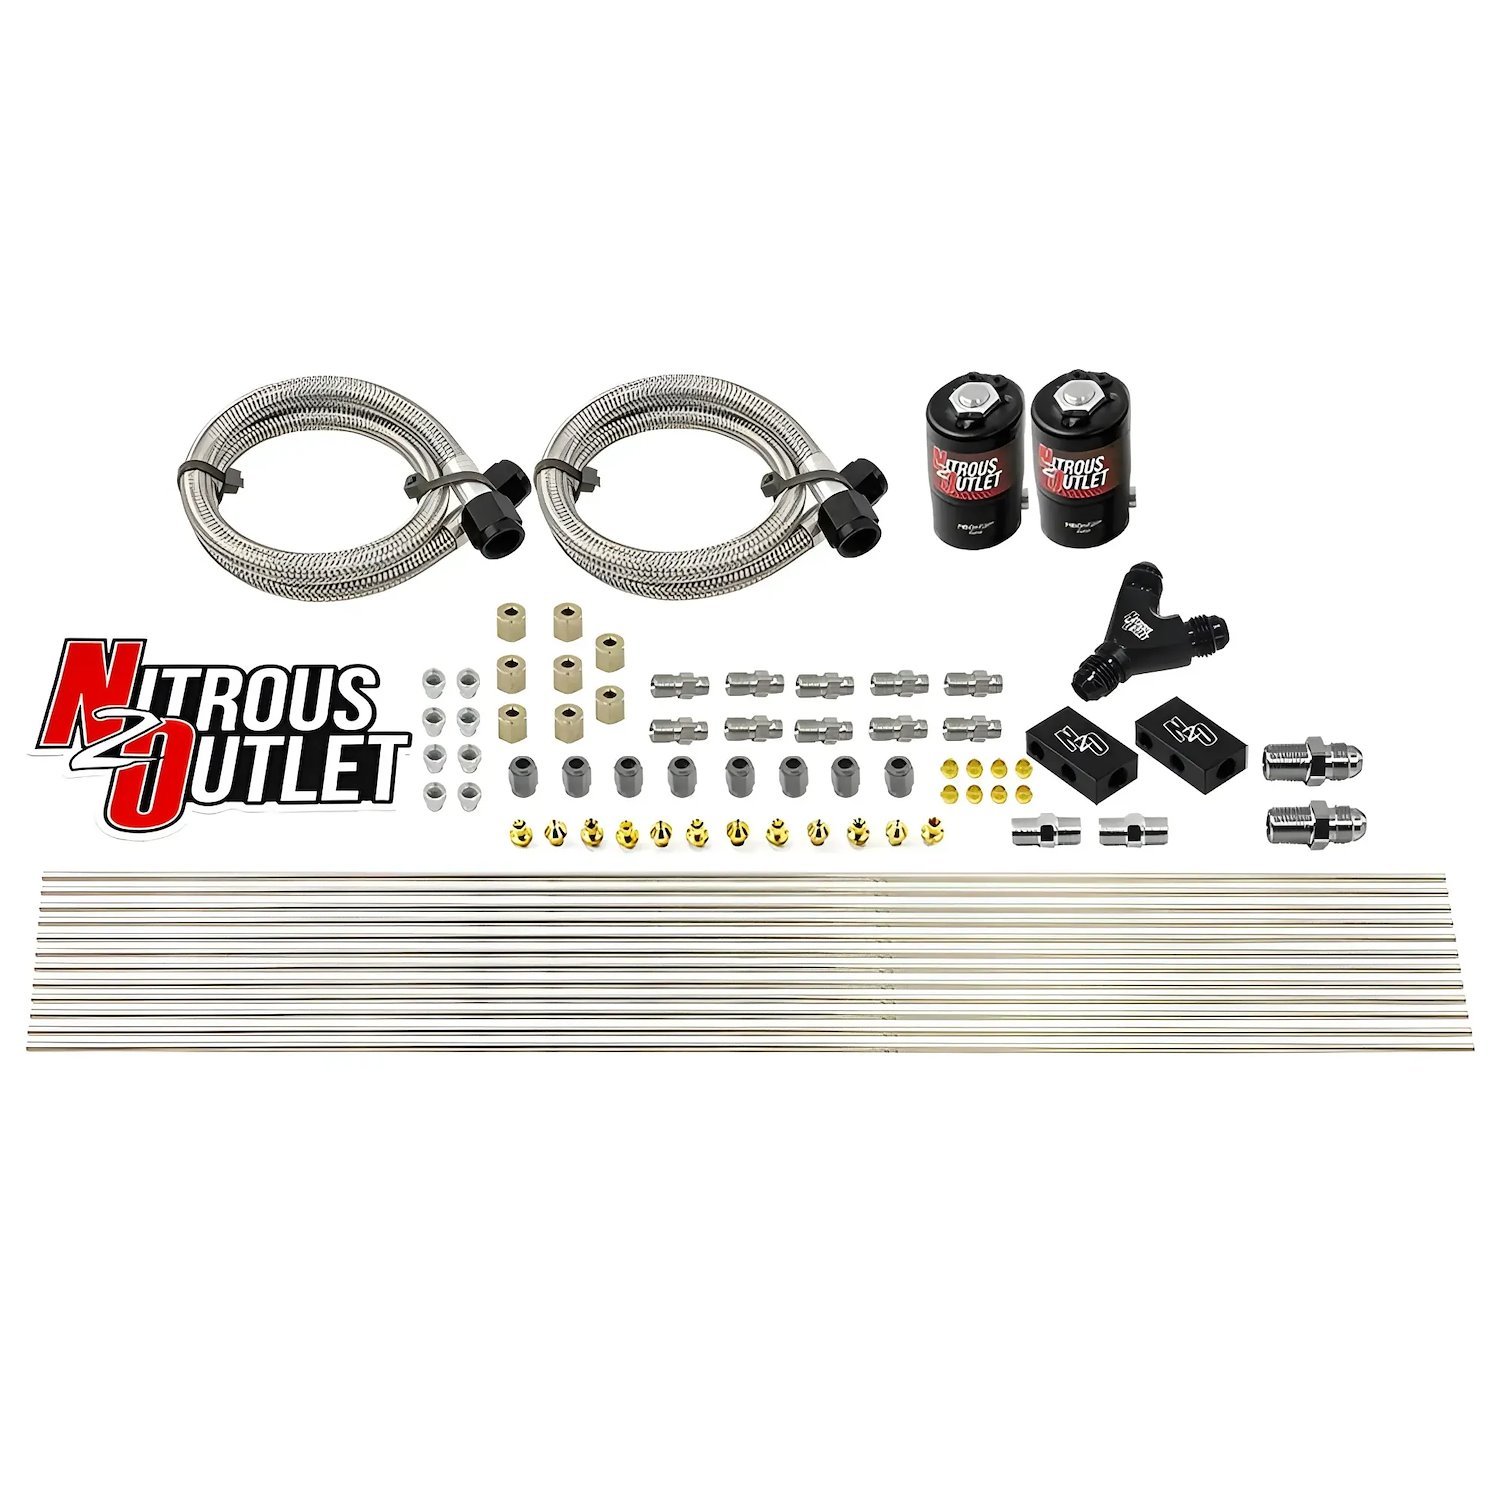 00-10418-L Dry 8-Cyl Solenoid Forward Direct Port Conversion Kit, Two .112 Nitrous Solenoid/Compact Distribution Blocks